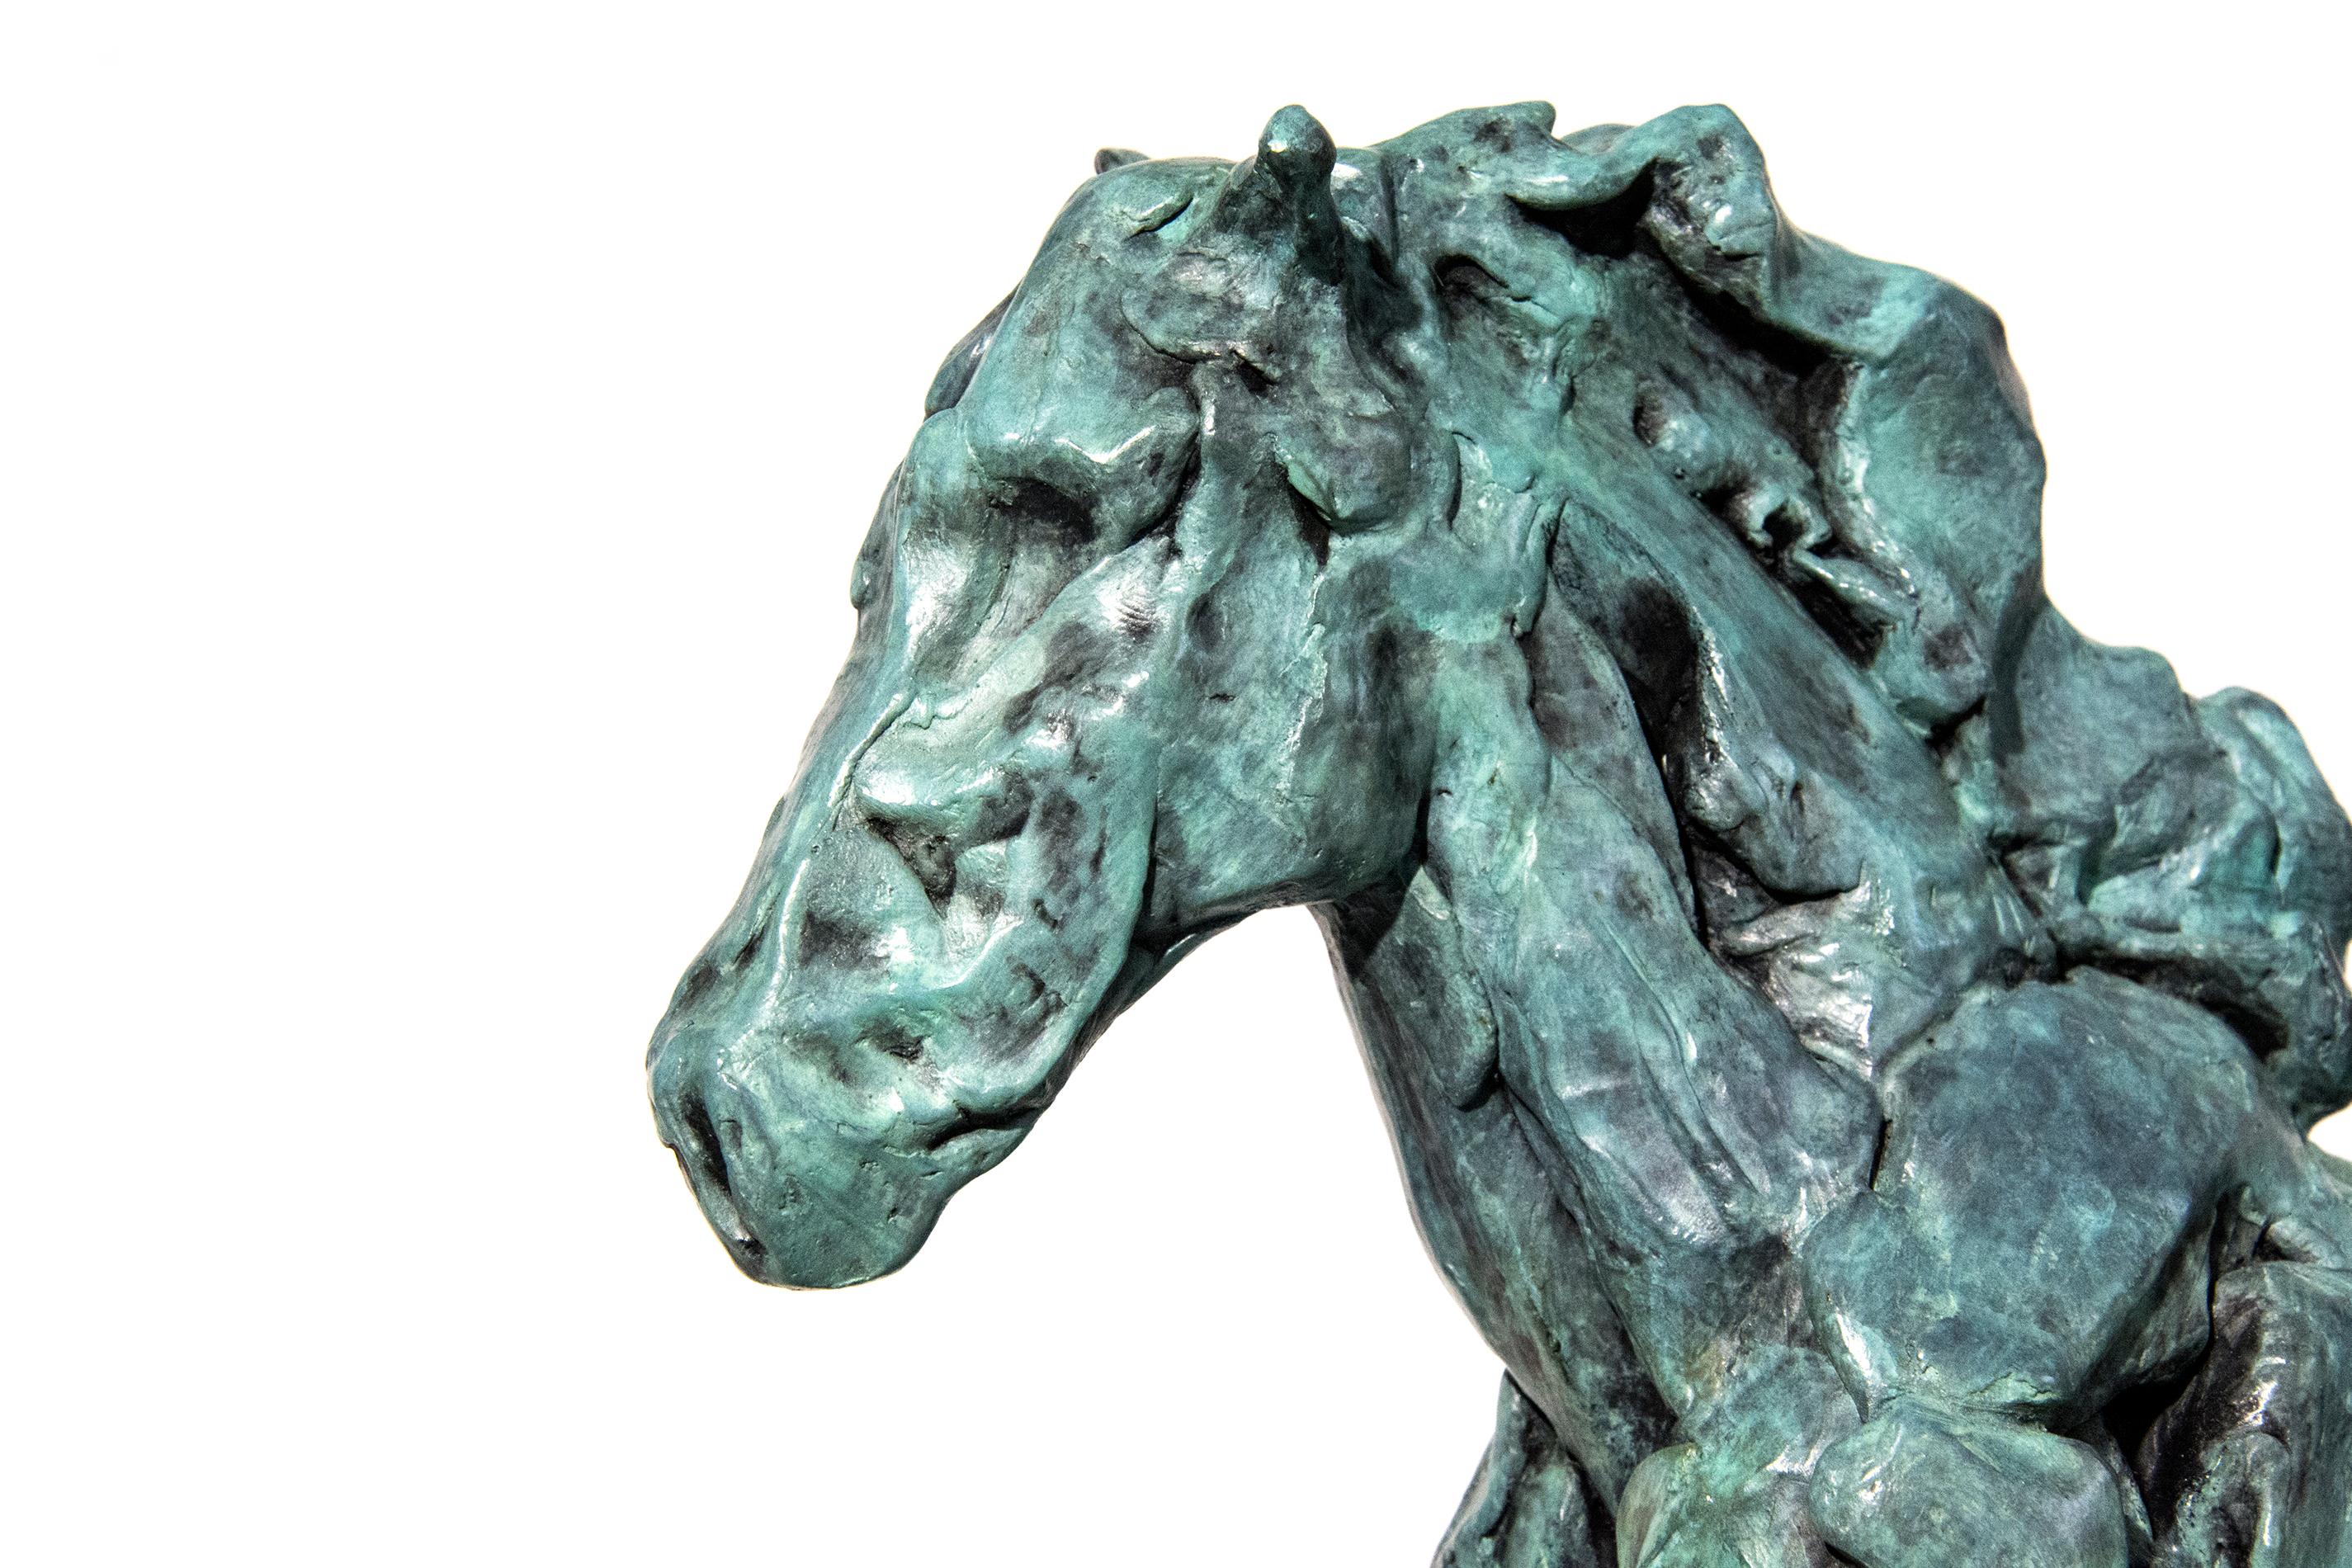 The majesty and power of a horse as it rears up is captured in this dynamic bronze statuette by Canadian sculptor, Richard Tosczak. His work begins with a quickly sketched pen and ink single drawing of each piece which is then formed in clay and